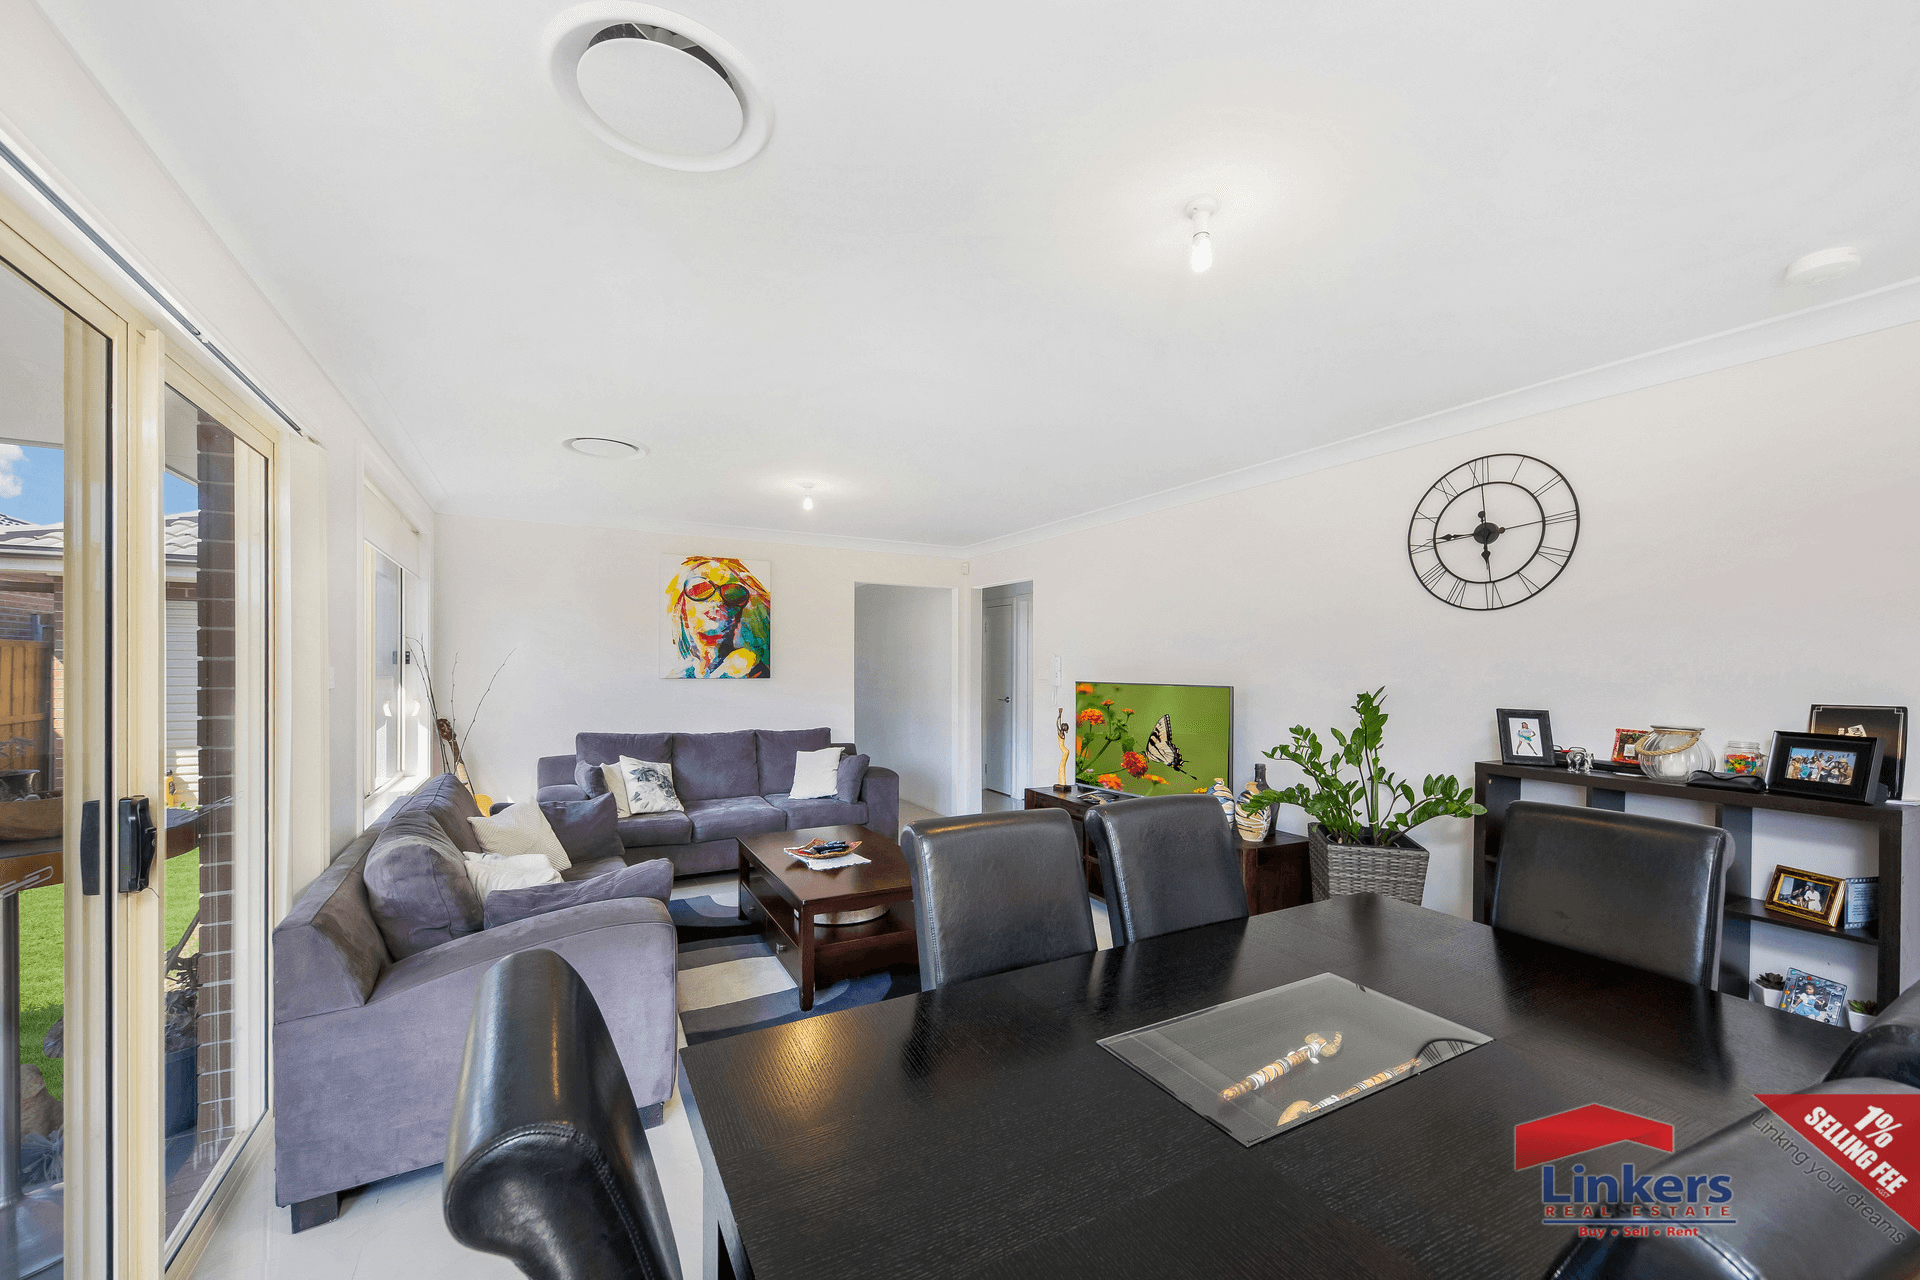 Number 5 Buckley Ave., Airds, NSW 2560